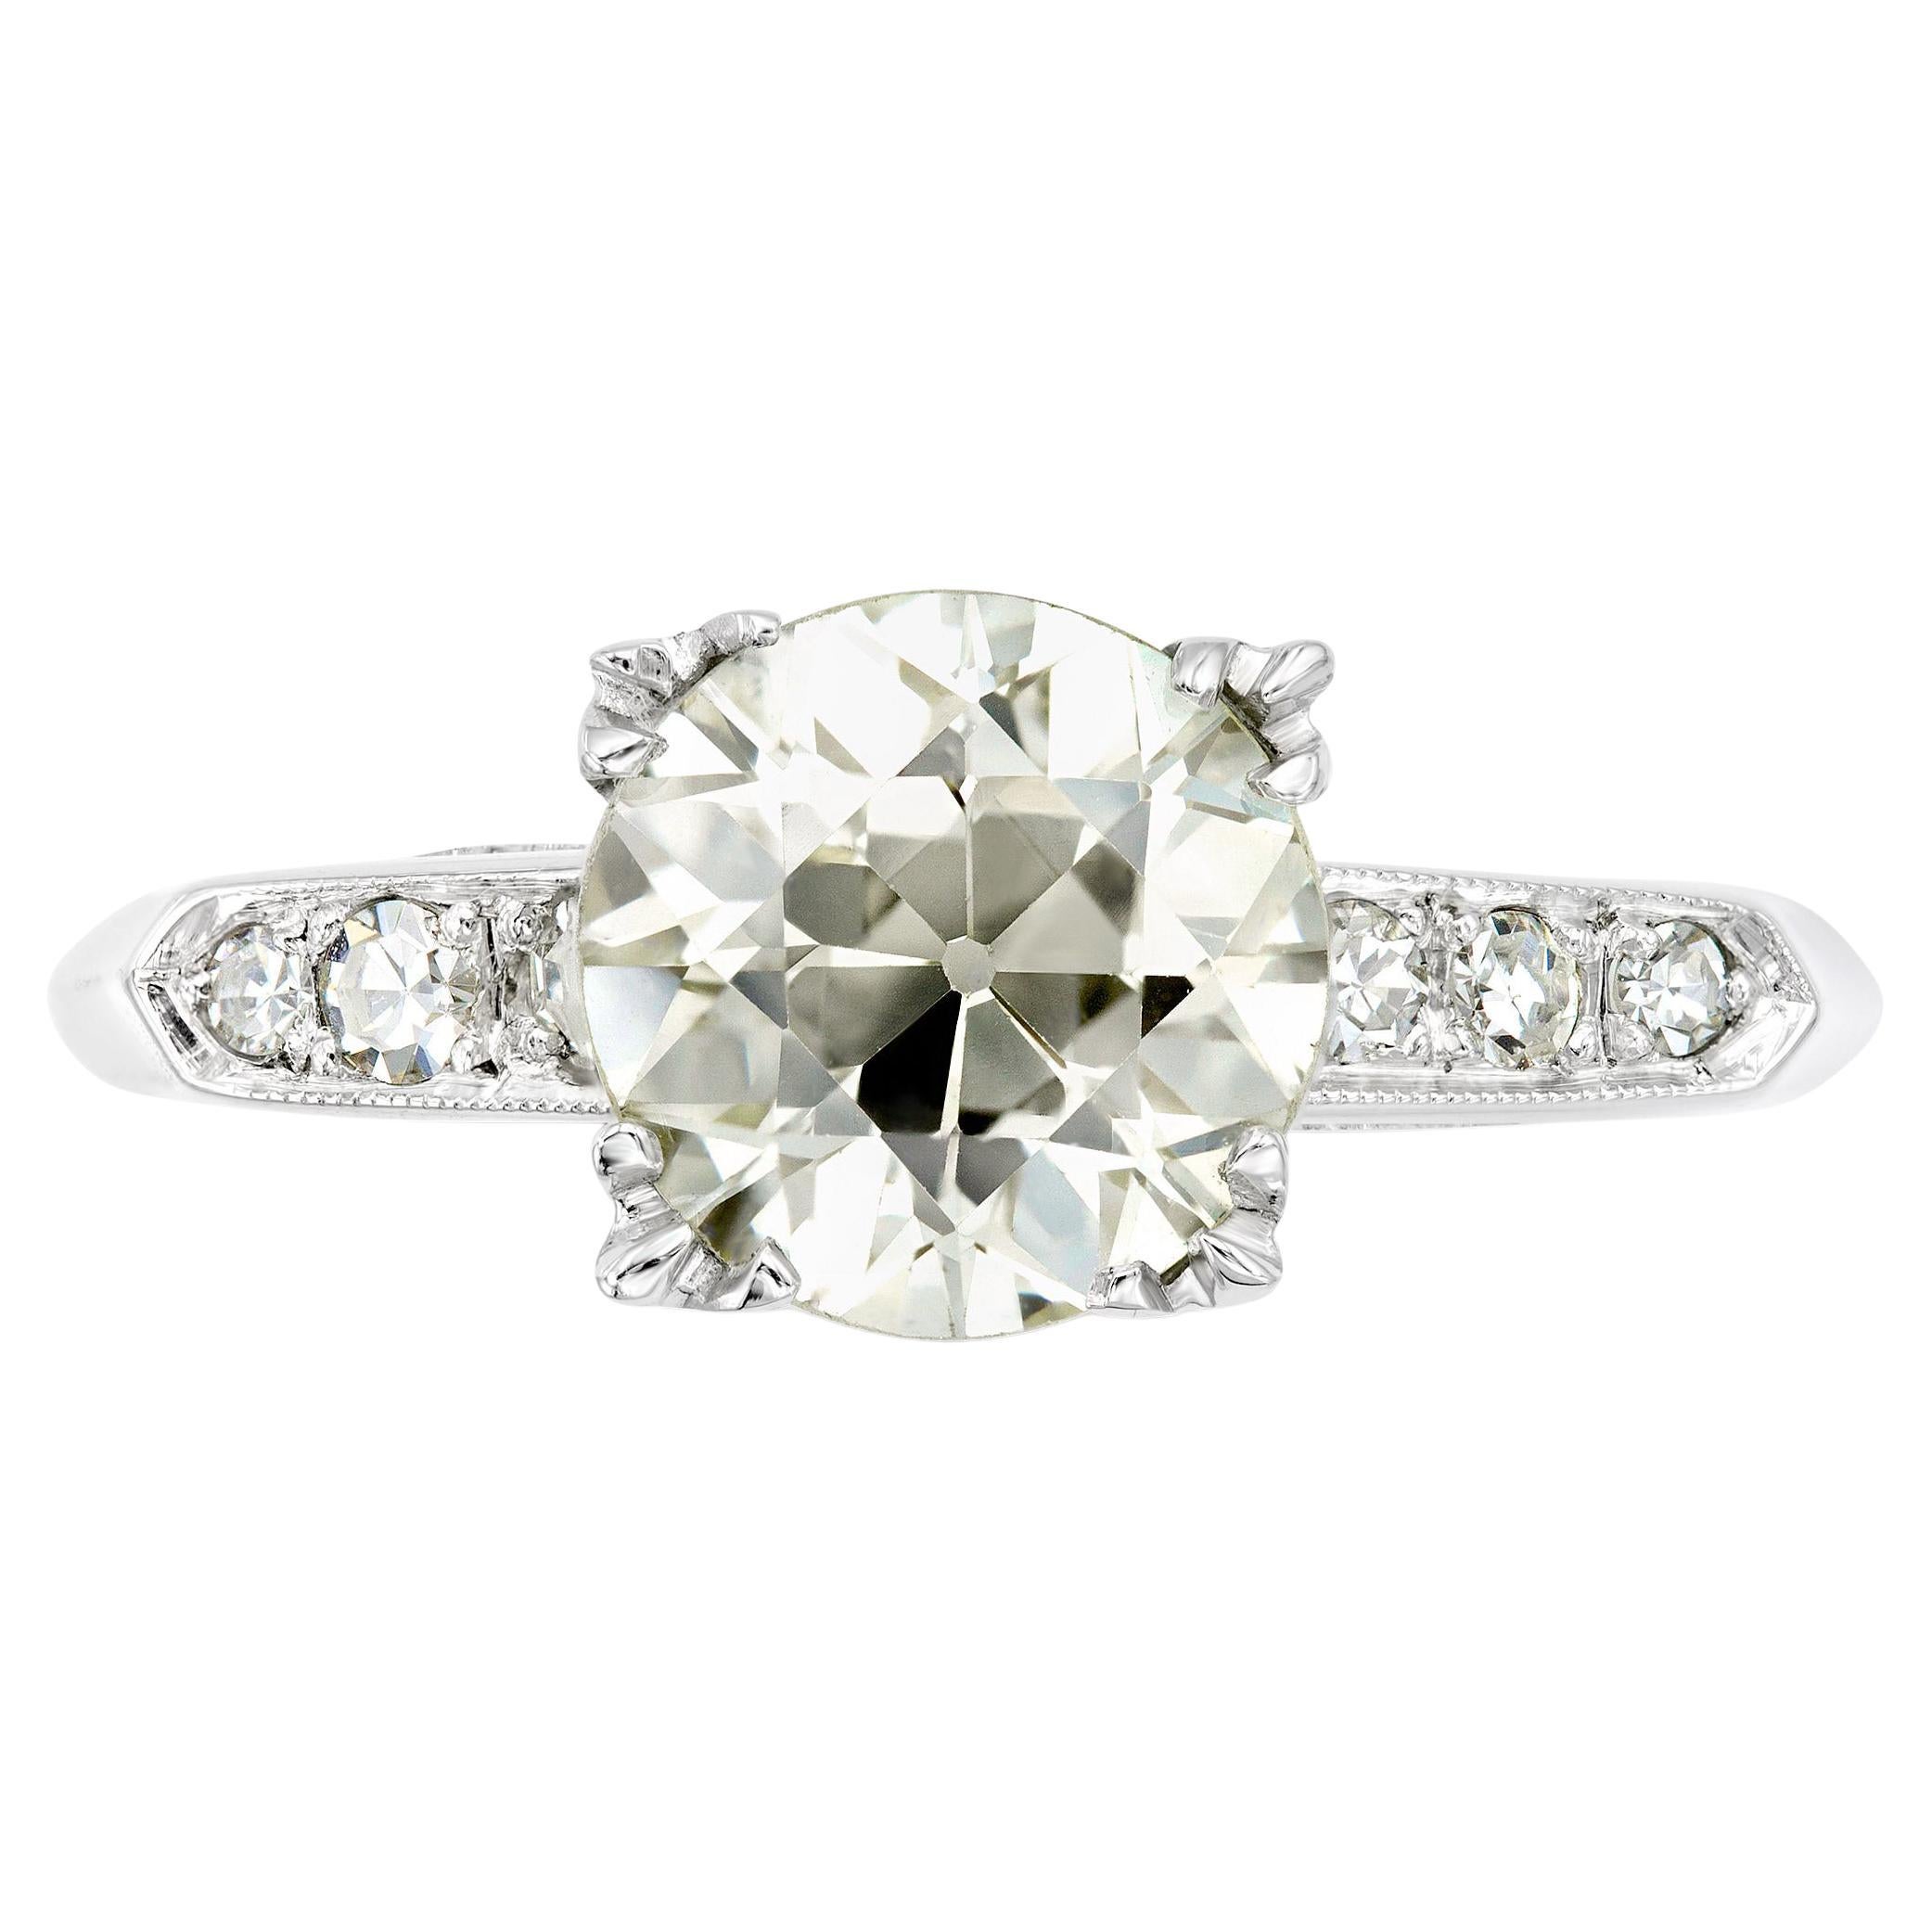 GIA Certified Art Deco 1.78 Ct. Old European Cut Diamond Engagement Ring For Sale